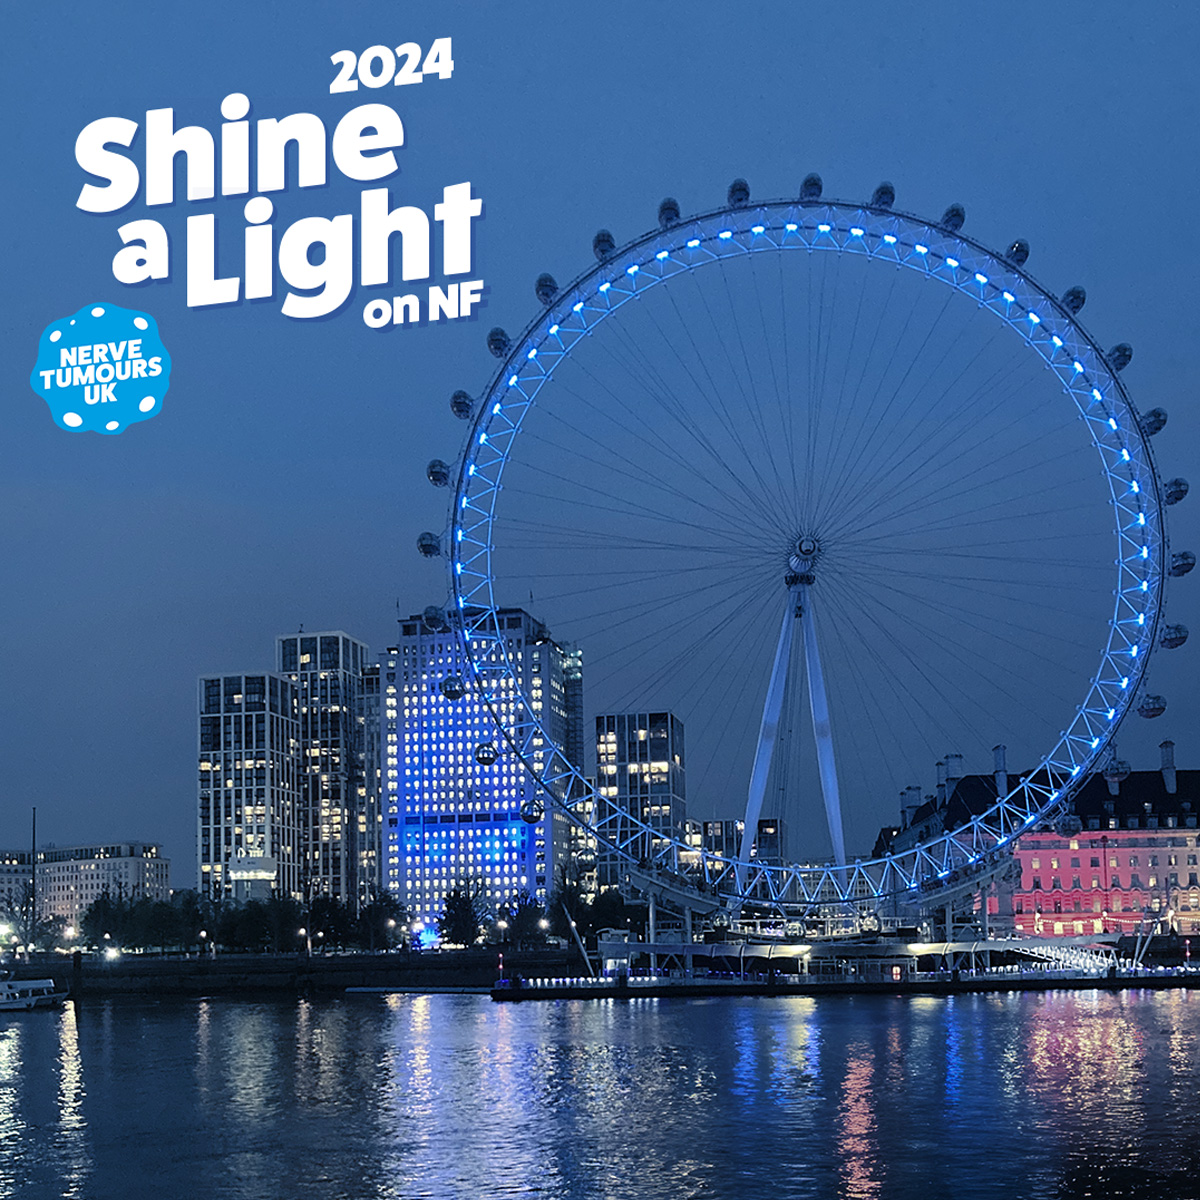 Council's Civic Headquarters will light up blue tonight to raise awareness on World Neurofibromatosis Day 2024. For more information go to shorturl.at/ezK57 #ShineALight #WorldNFAwareness @NervetumoursUK